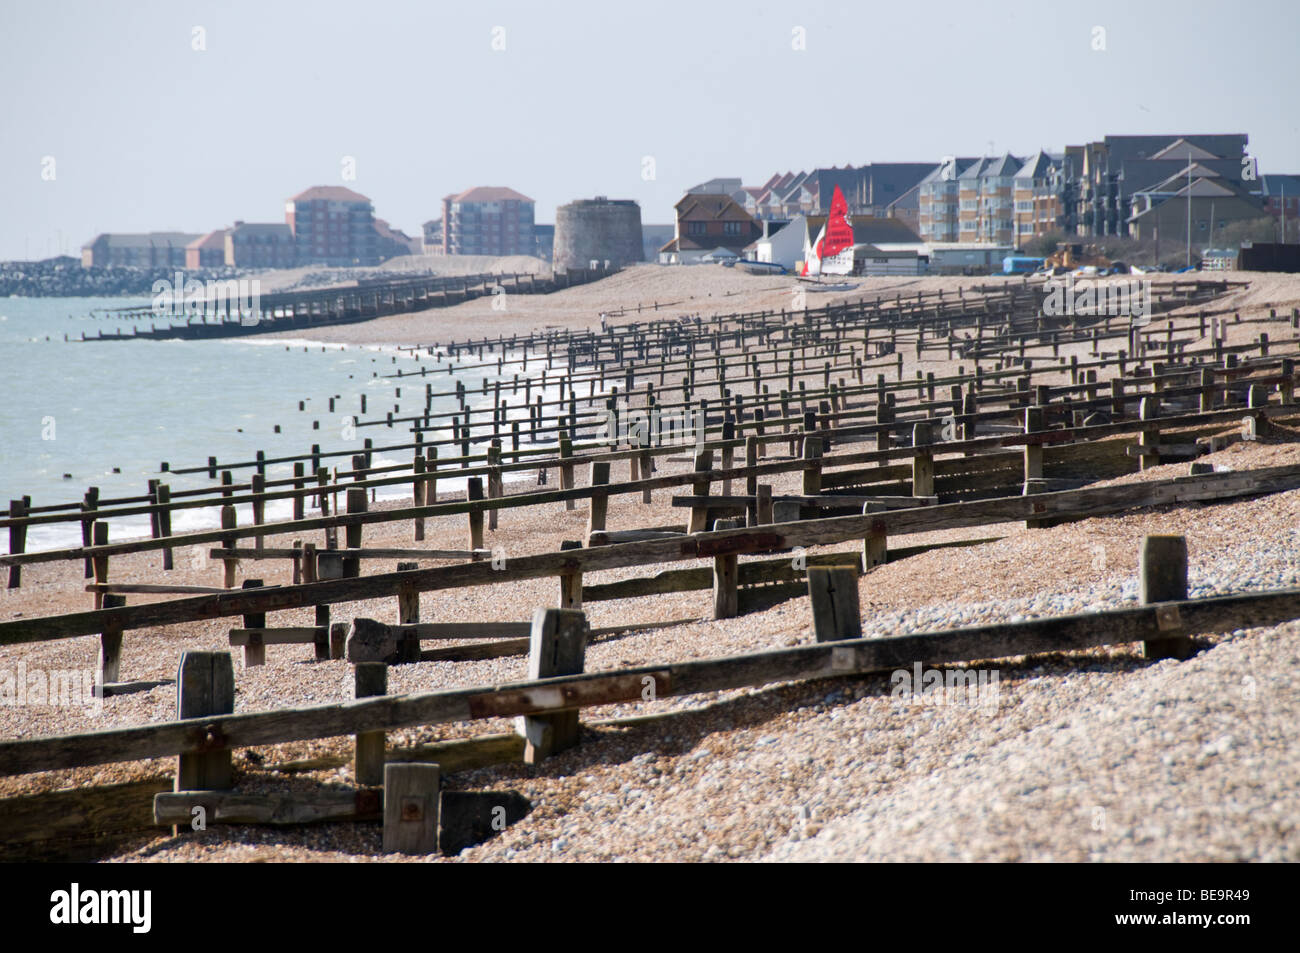 Apartment blocks on the beach, Pevensey Bay, East Sussex, UK Stock Photo